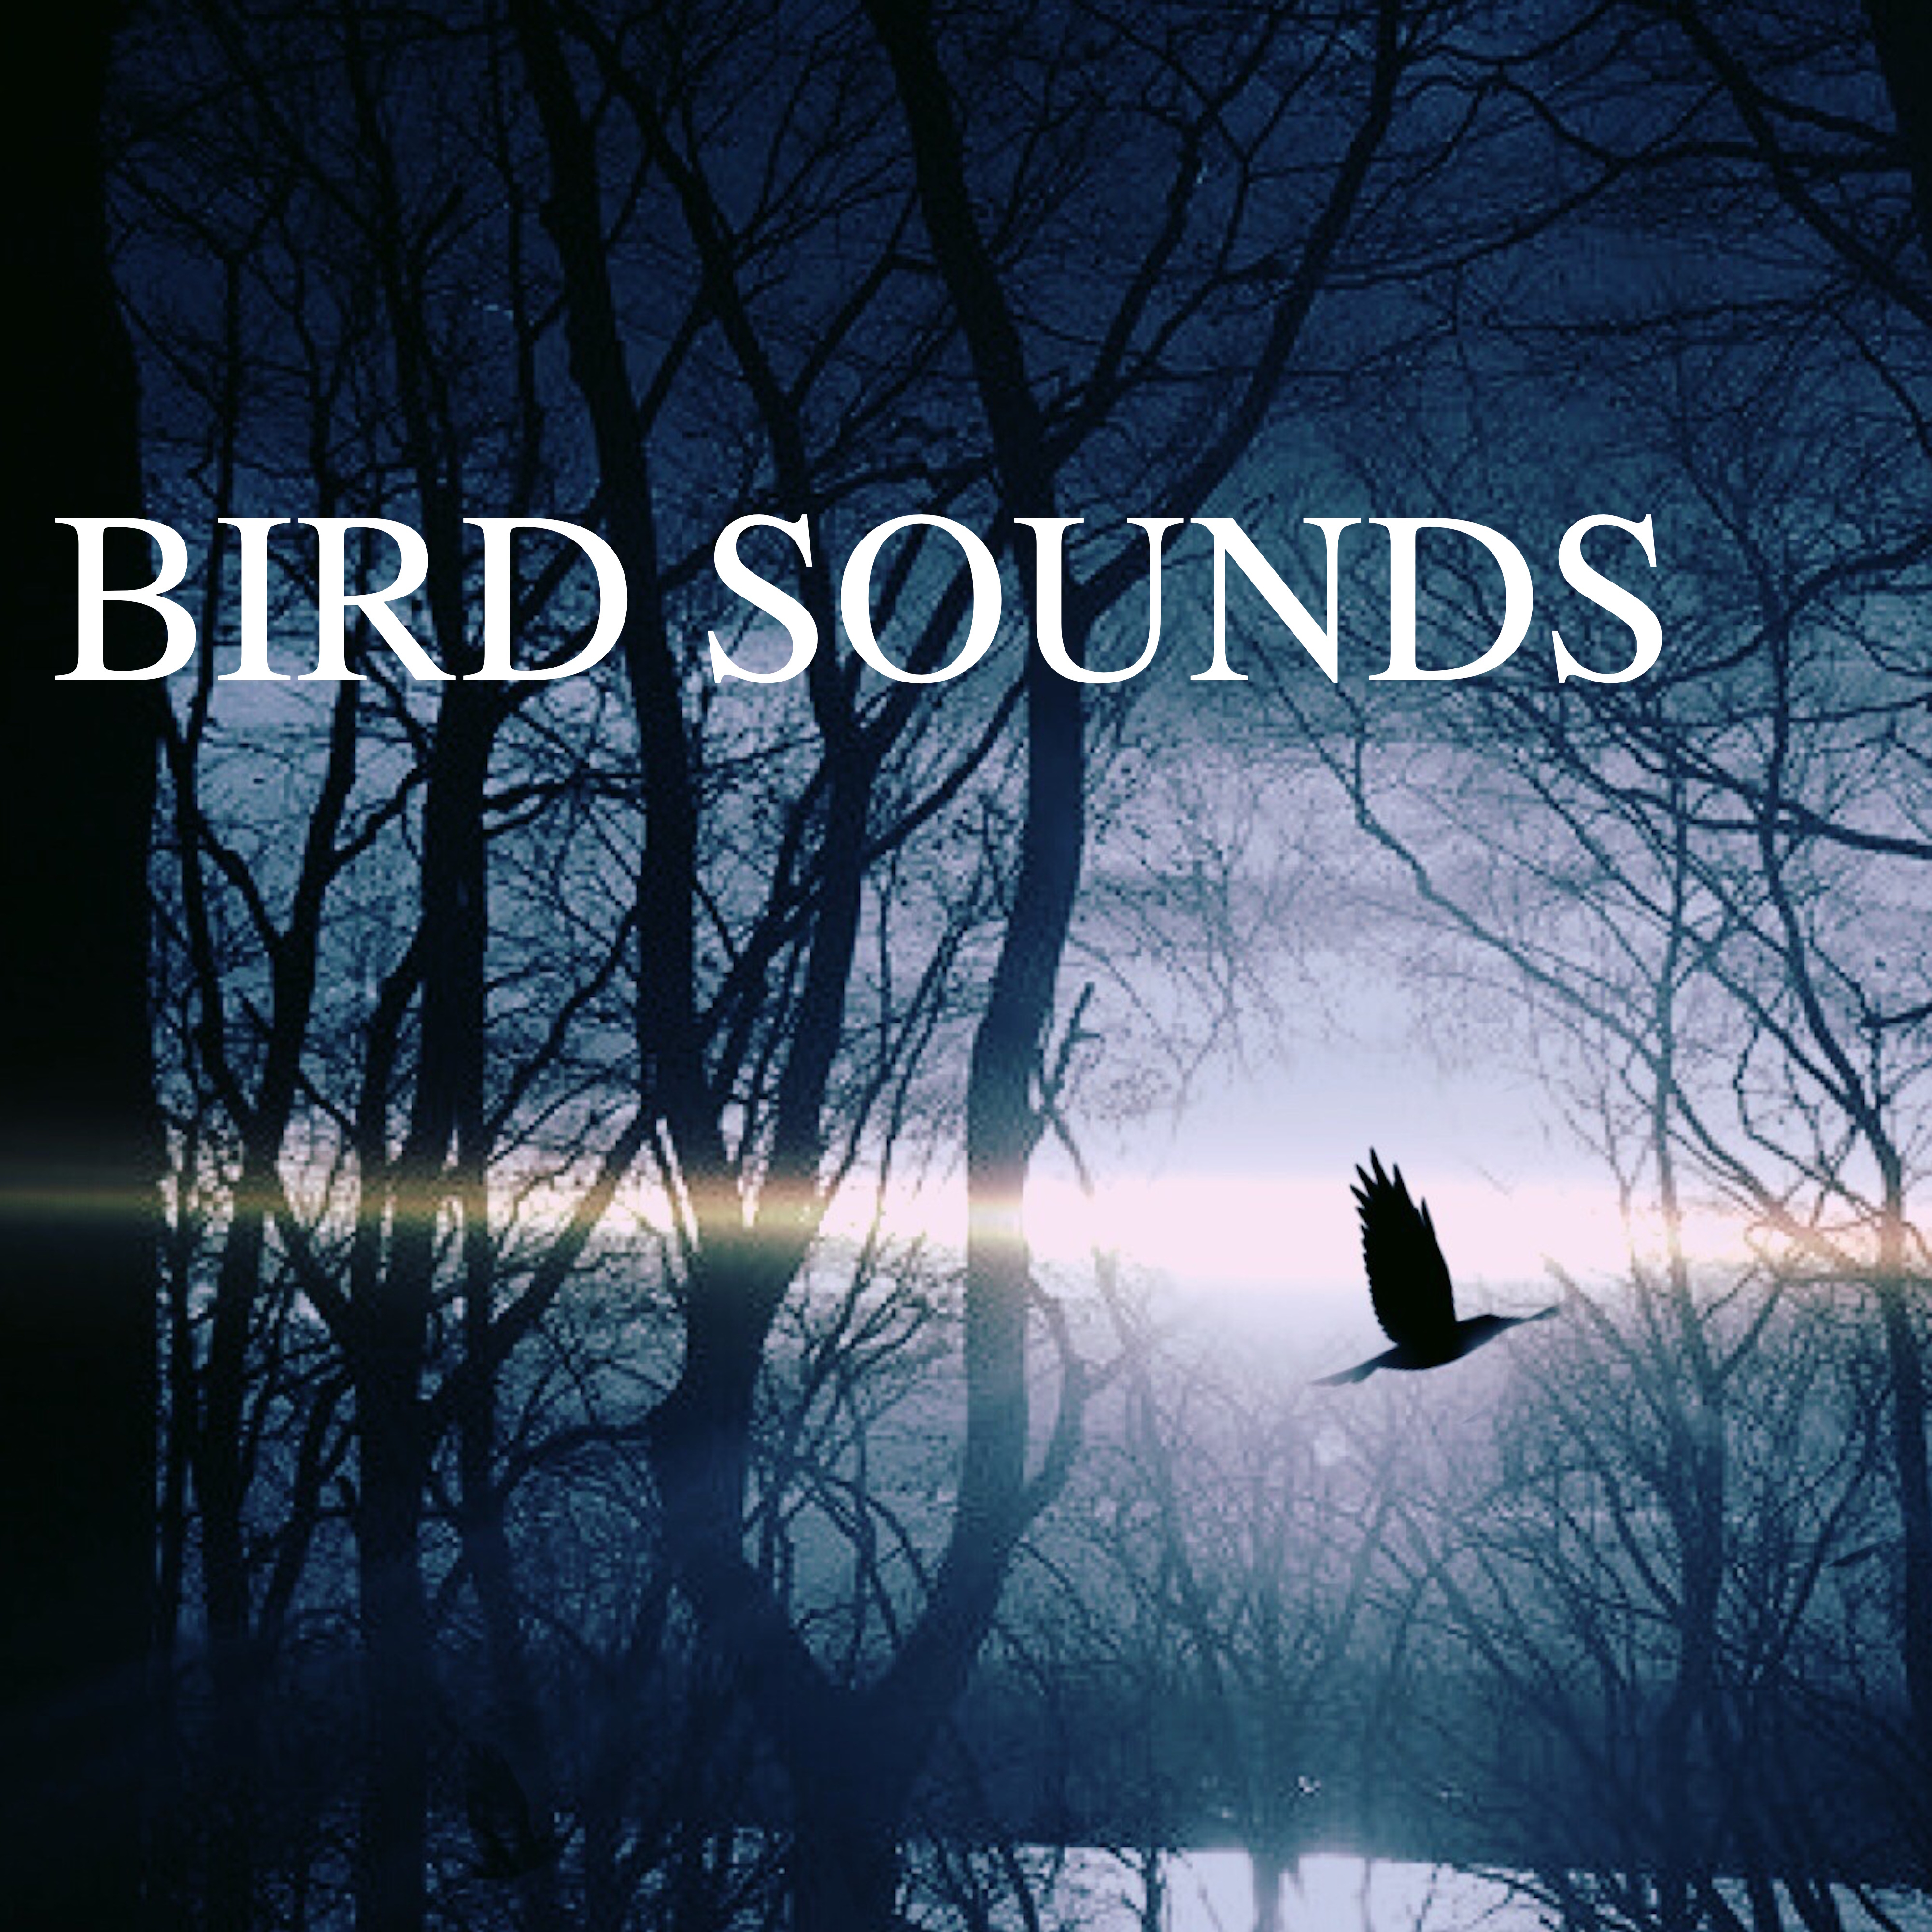 Bird Sounds – Soothing Natural Music for Deep Relaxation & Sleep, Nature Sounds with Piano and Flute